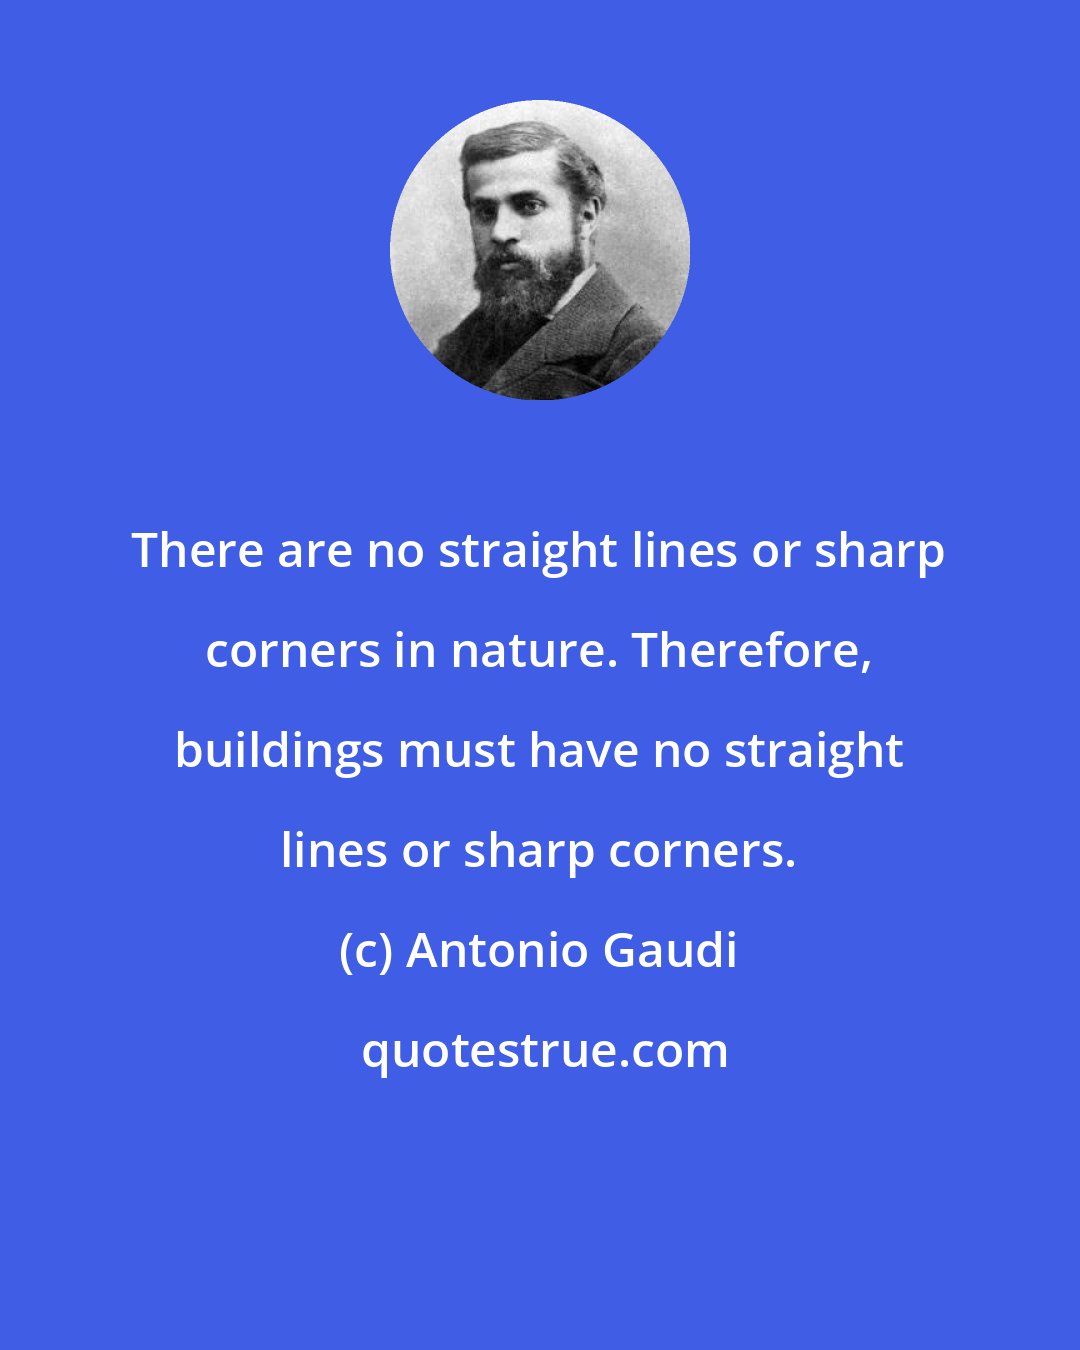 Antonio Gaudi: There are no straight lines or sharp corners in nature. Therefore, buildings must have no straight lines or sharp corners.